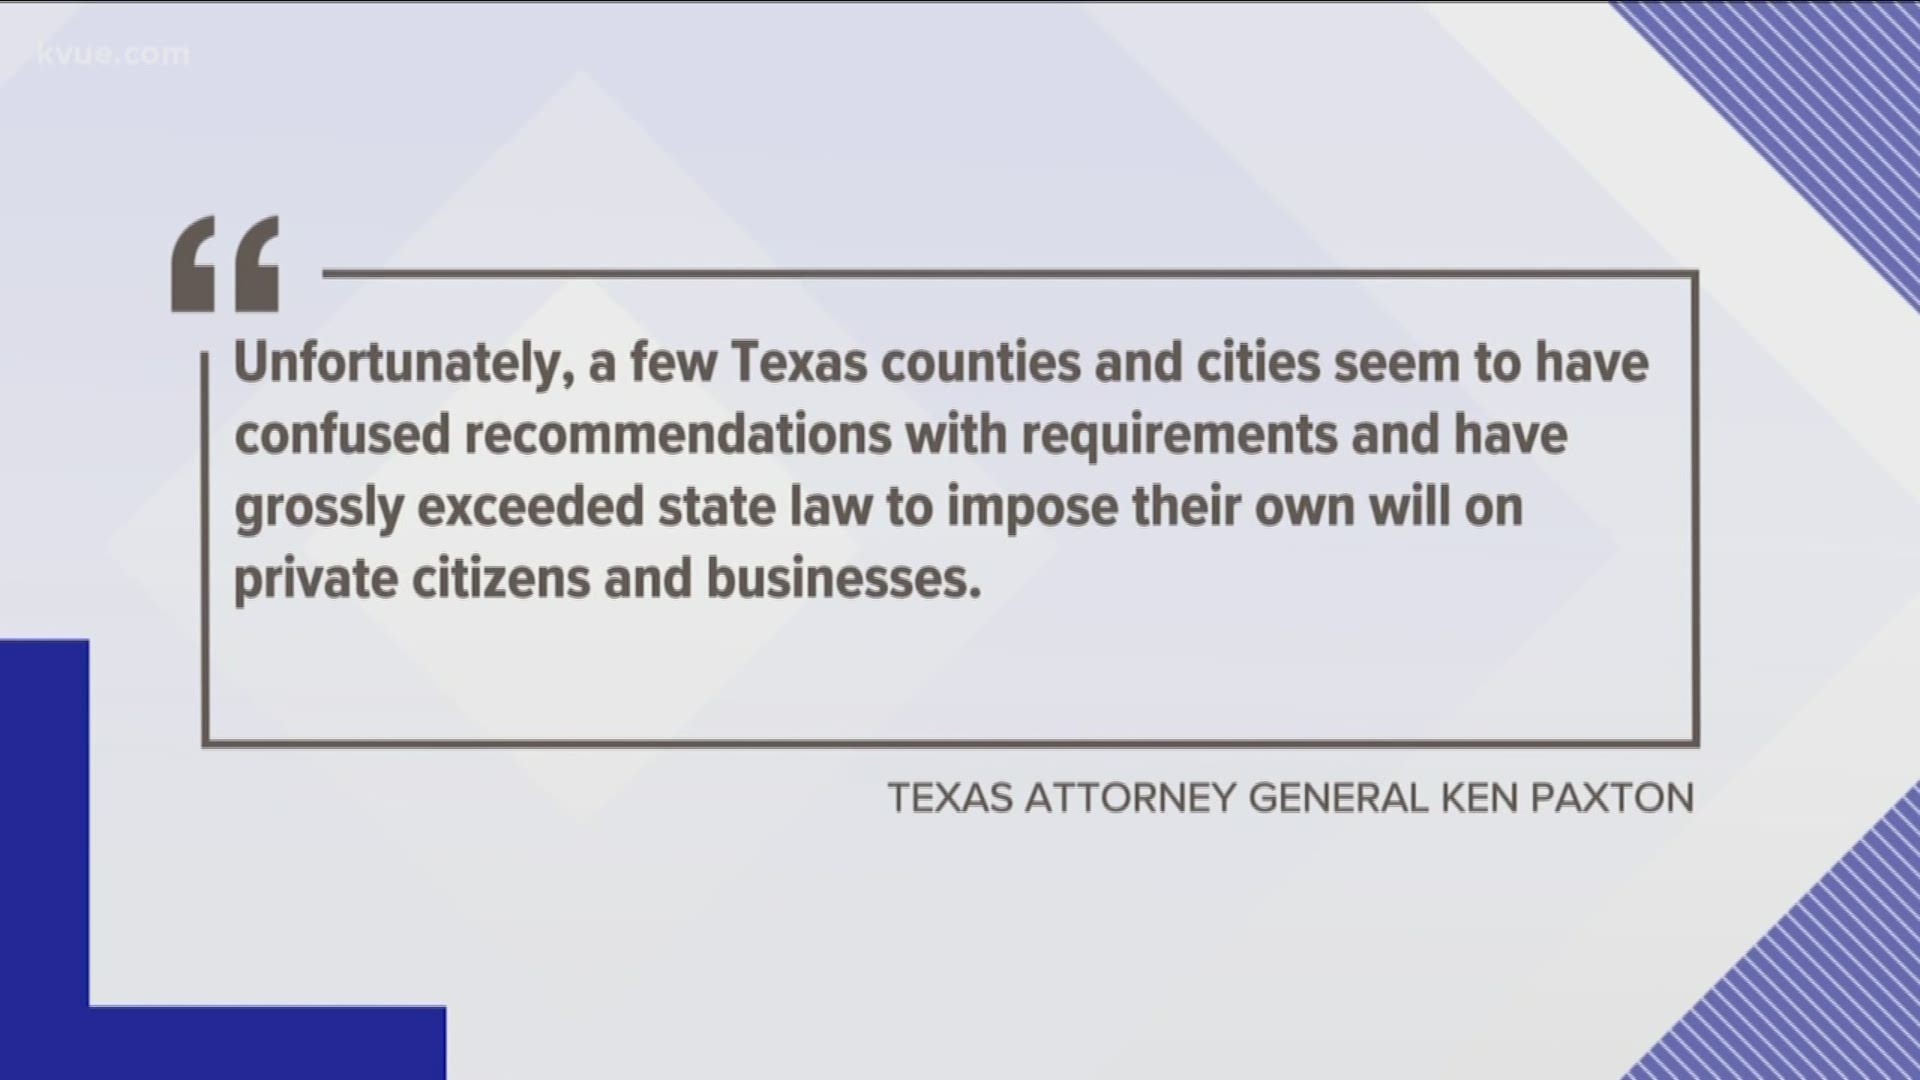 Texas Attorney General Ken Paxton said parts of the Austin-Travis County orders are "unlawful" and "unenforceable."